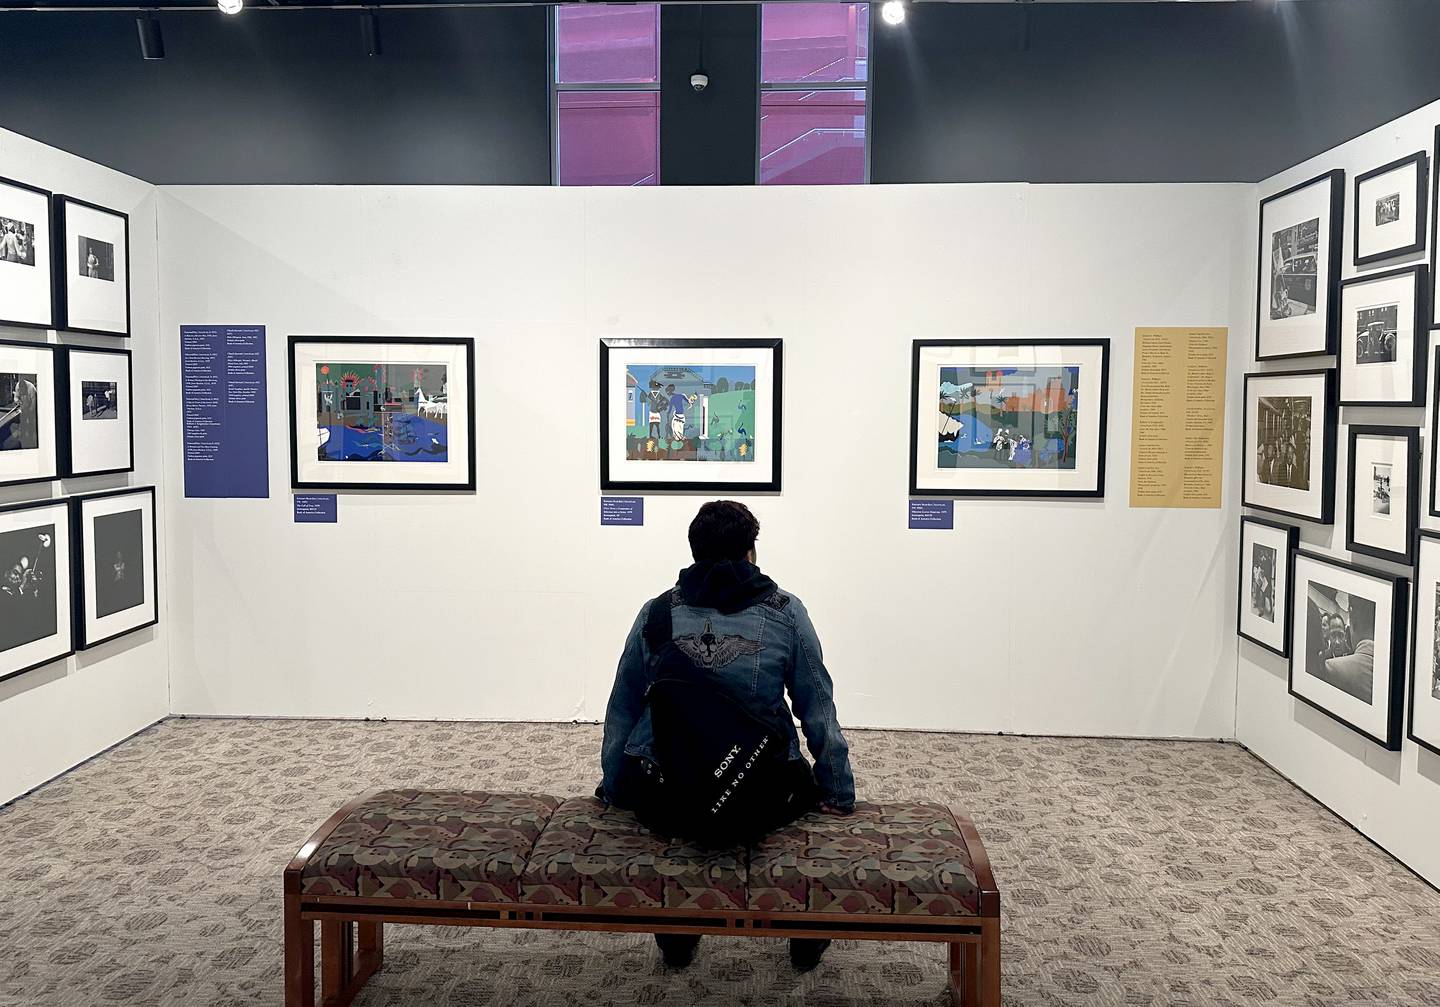 The Vision and Spirit collection, now at the Reginald F. Lewis Museum, uplifts and shares the Black experience through art, Janet Currie, greater Maryland president of Bank of America, says.  The images are (l to r) Romare Bearden (American, 1911-1988); The Fall of Troy, 1979; Screenprint, 80/125; Bank of America Collection 
Romare Bearden (American, 1911-1988); Circe Turns a Companion of Odysseus into a Swine, 1979; Screenprint, AP; Bank of America Collection 
Romare Bearden (American, 1911-1988); Odysseus Leaves Nausicaa, 1979; Screenprint, 80/125; Bank of America Collection